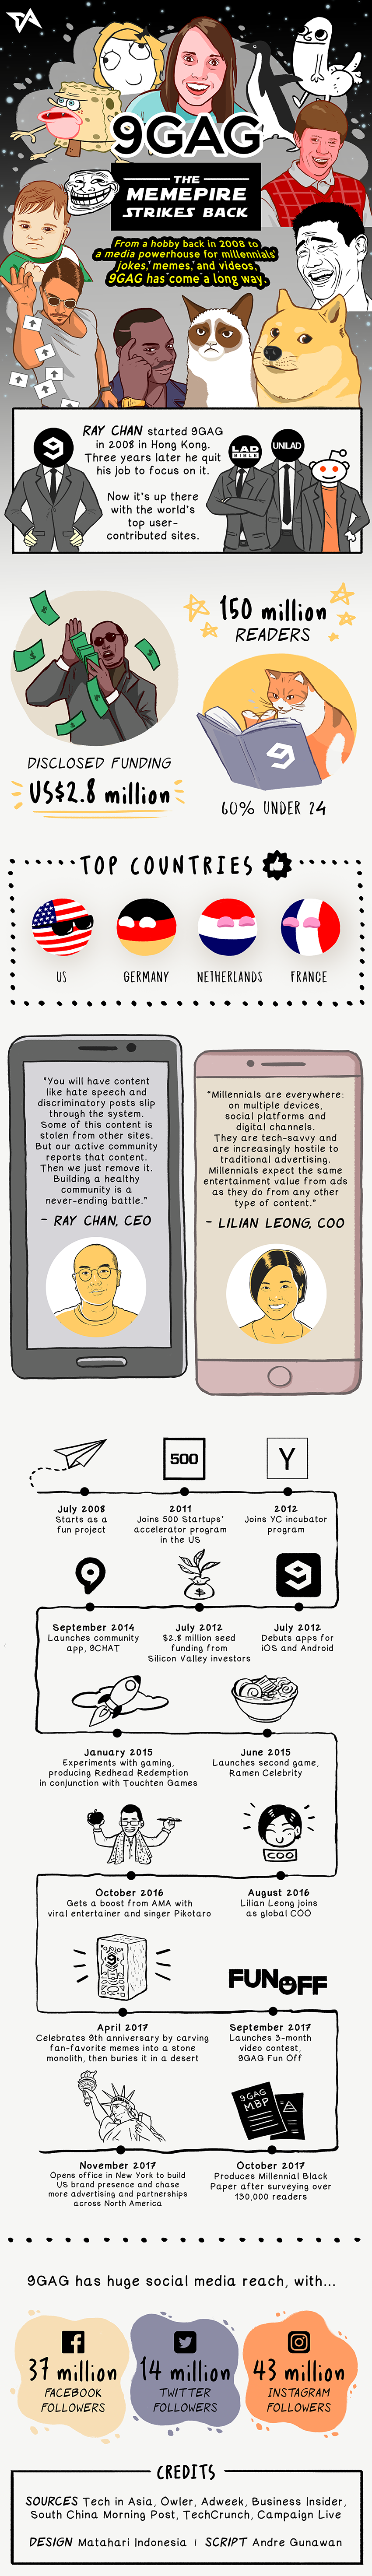 9Gag: From Memes to Media Empire - #Infographic